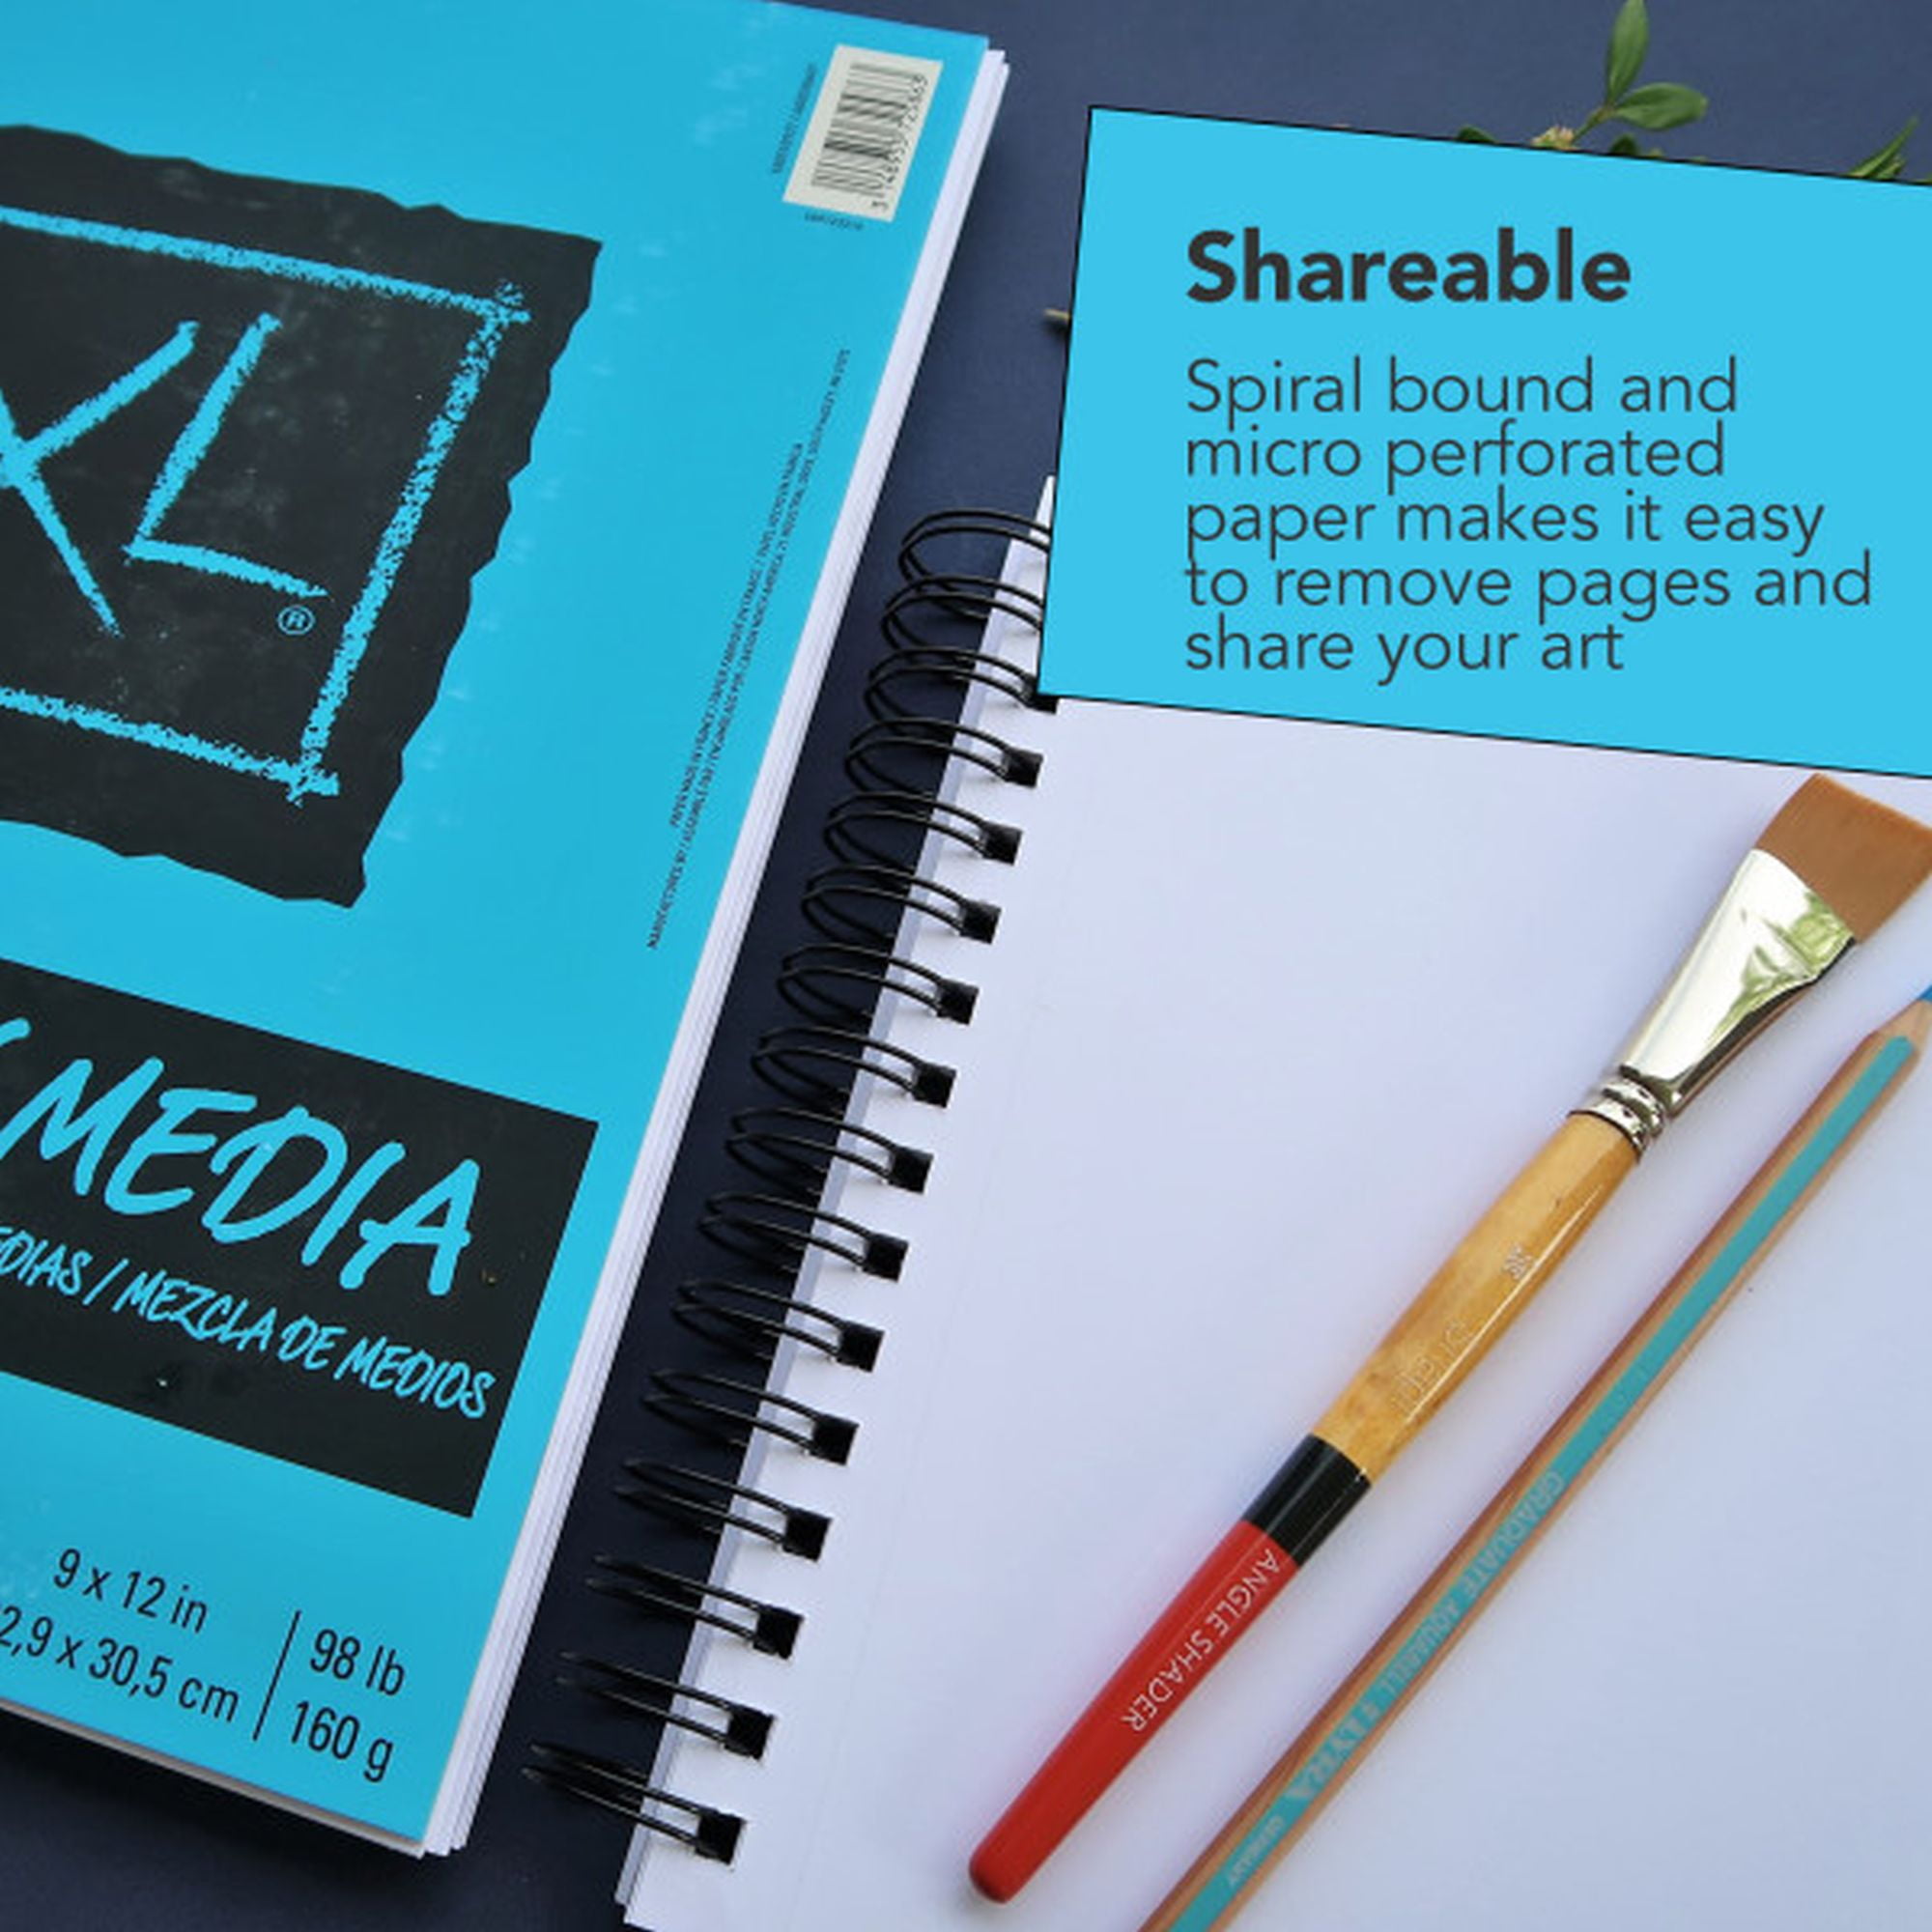 LIVE Sketchbook Tour and Review of Canson XL Mixed Media Sketchbook 